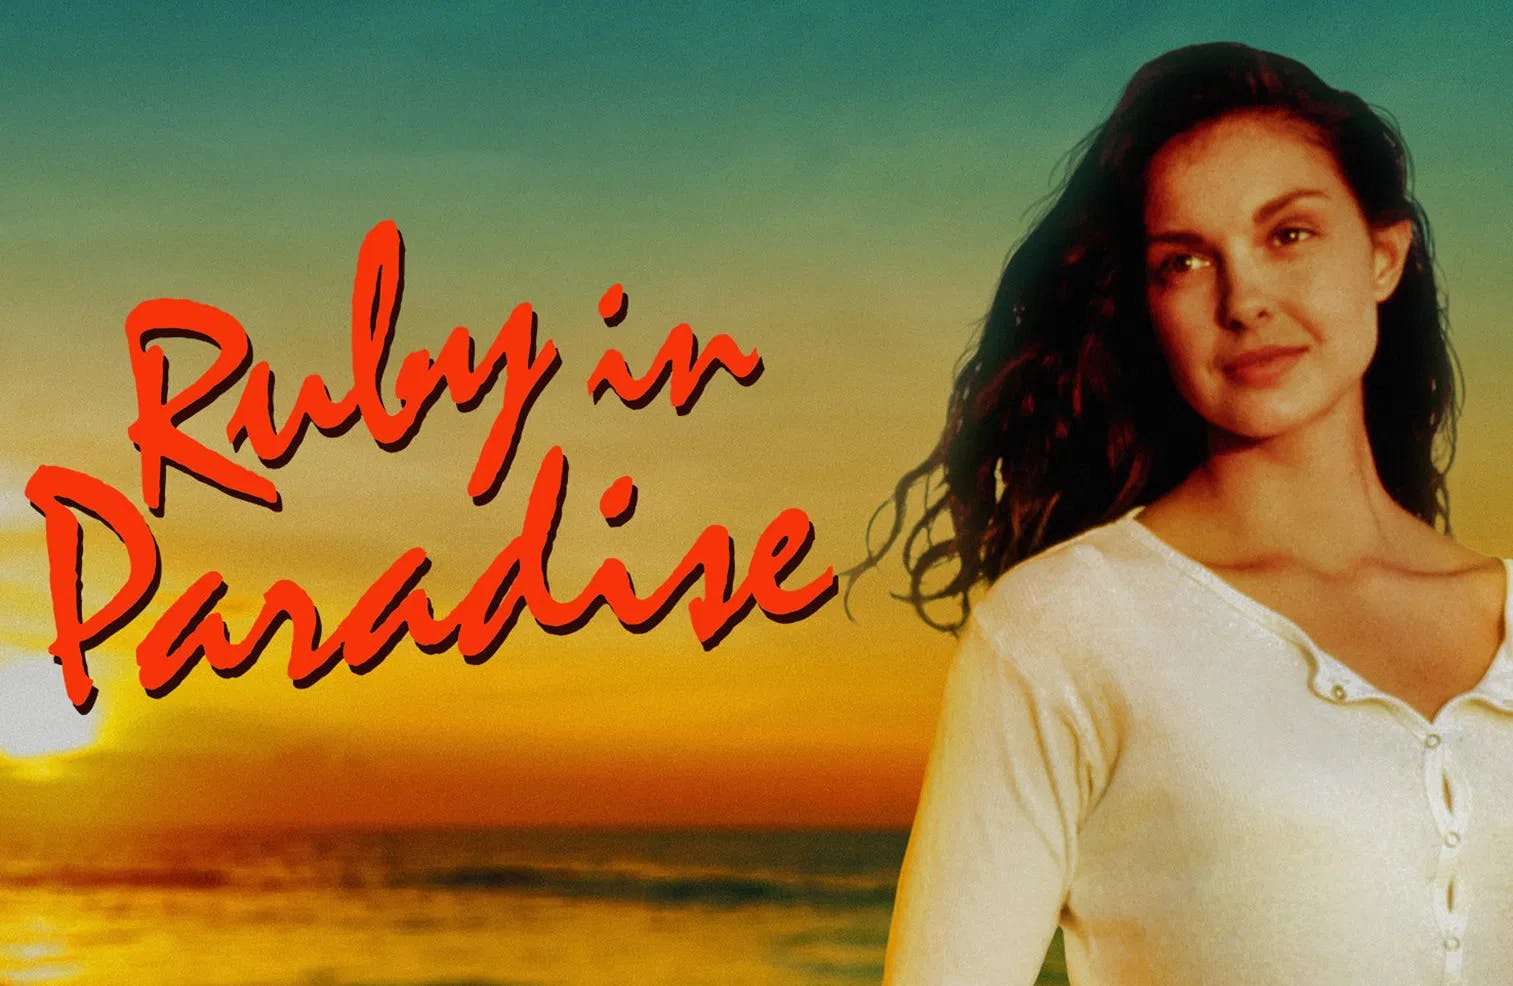 Her time under the sun: Ashley Judd shines in "Ruby in Paradise" / Photo courtesy of Quiver Distribution.